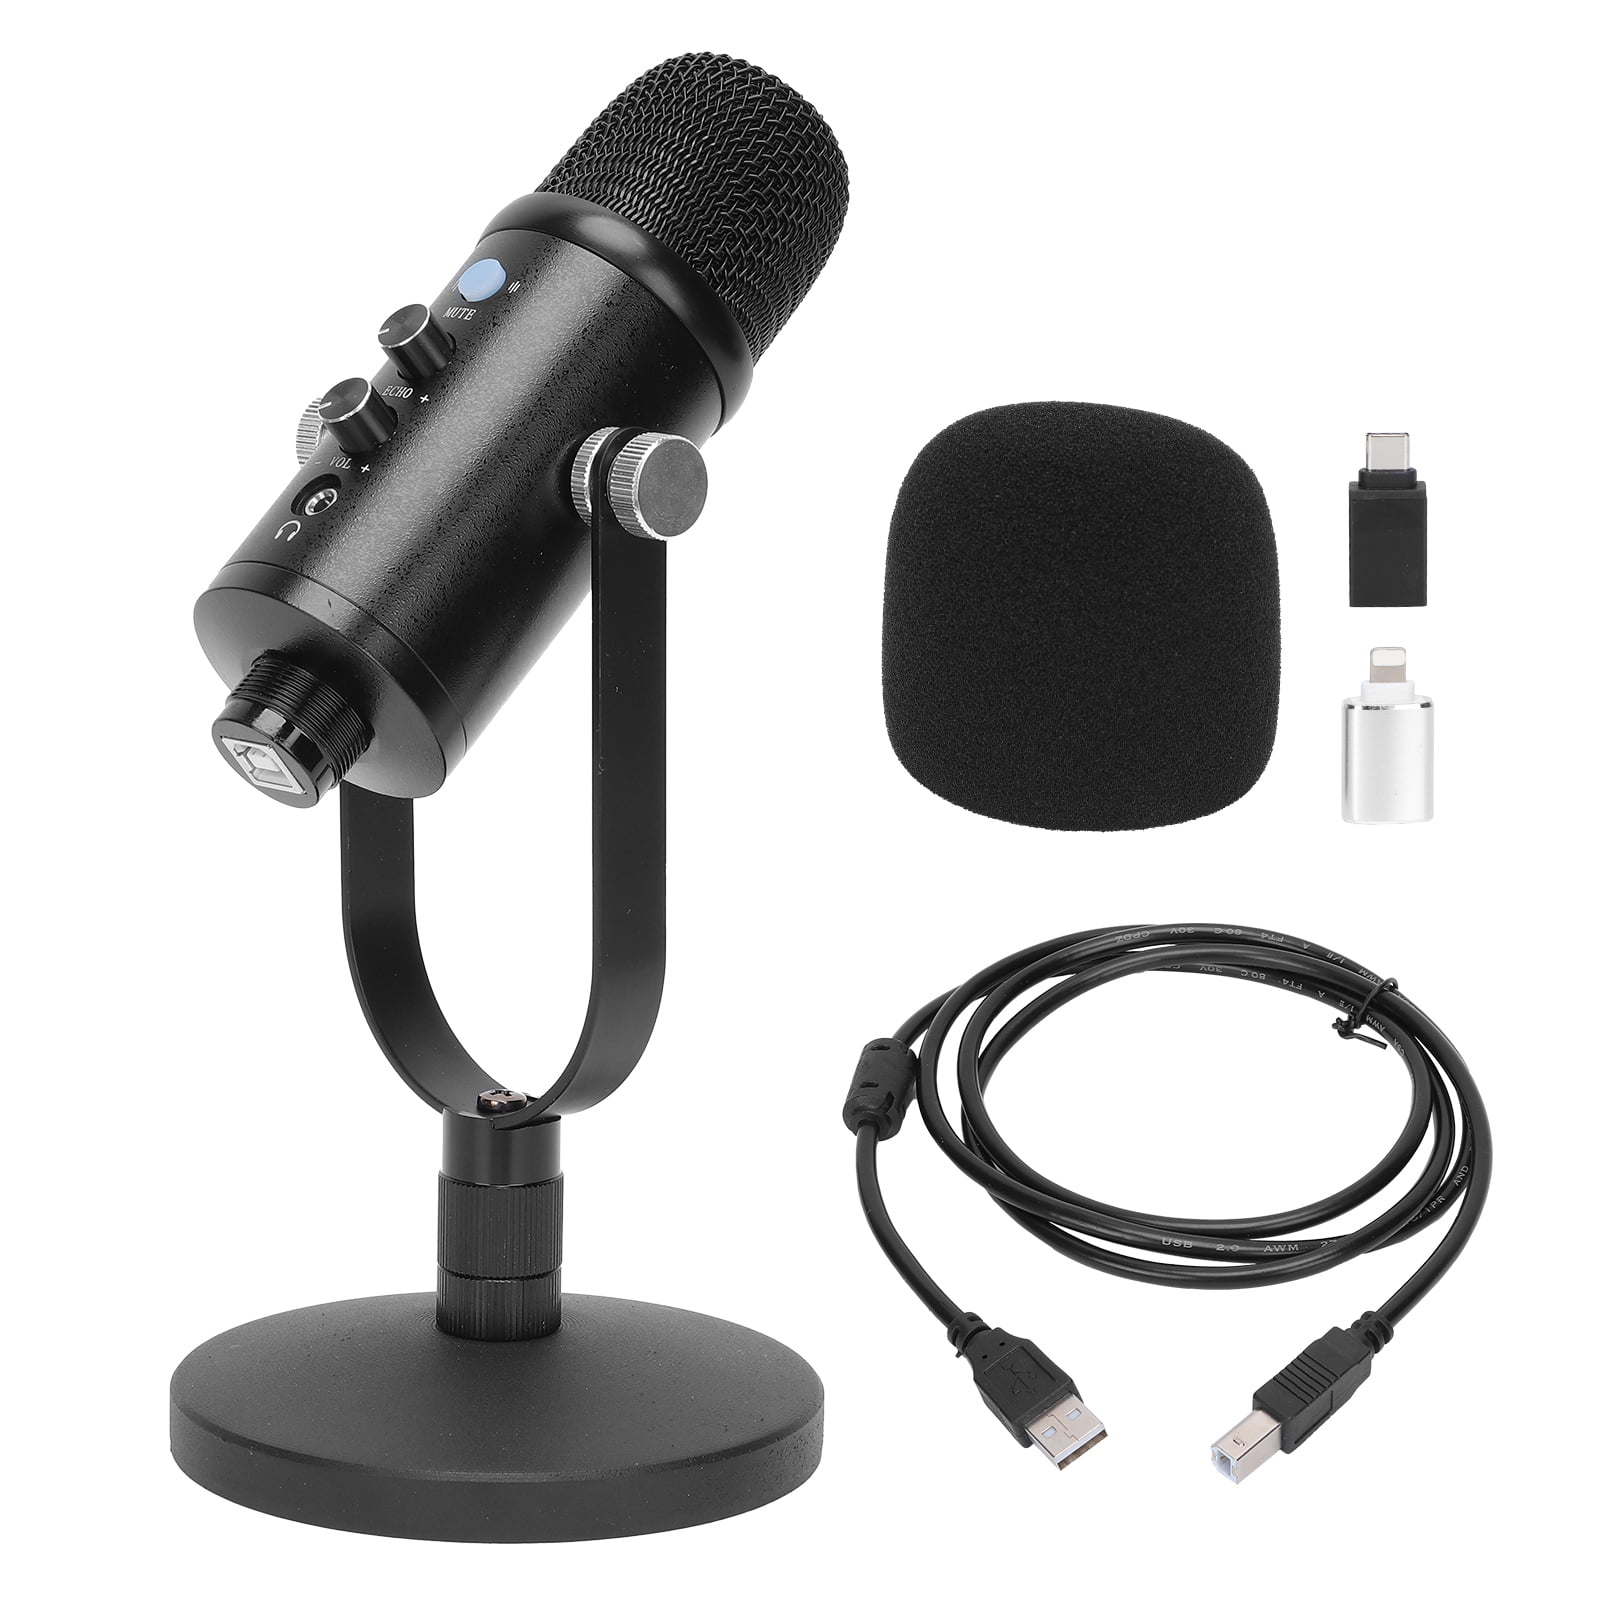 Compatible with PC iPhone Android & Windows Smartphones Professional Lavalier Microphone 4.9ft Lapel Microphone 3.5mm Jack for Recording YouTube/Tiktok/Video Conference/Podcast/Voice Dictation 